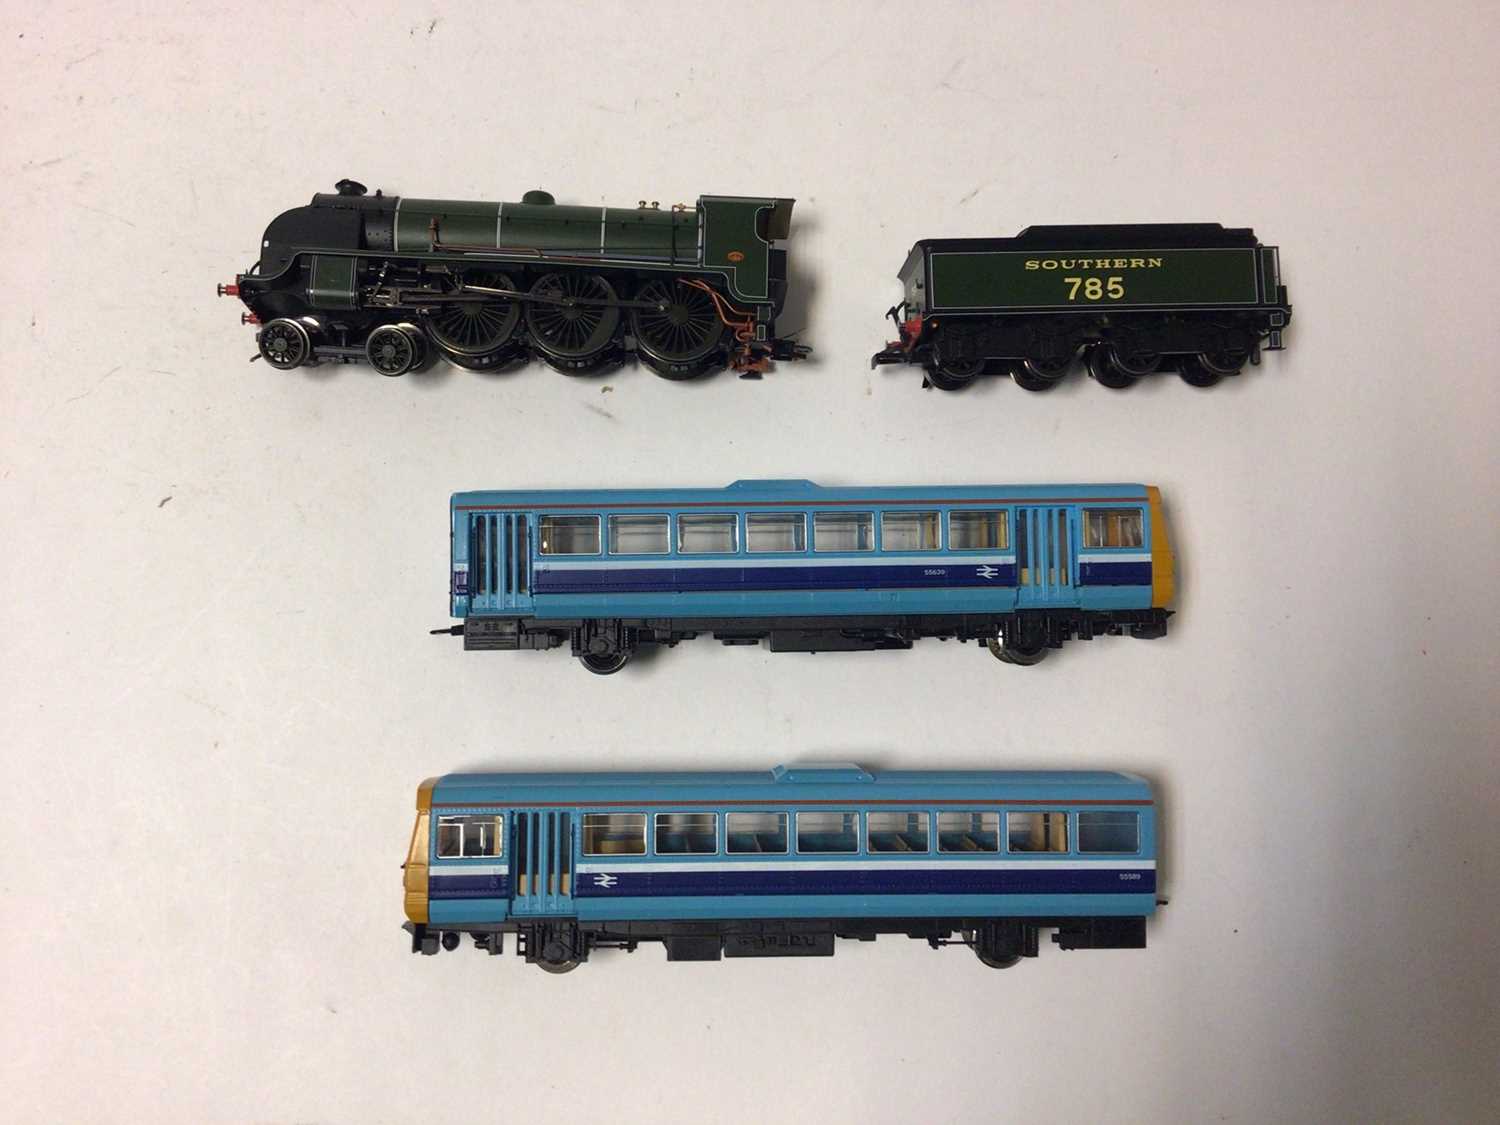 Lot 200 - Hornby OO gauge locomotives including BR two tone blue with yellow ends Provincial Sector Twin railbus Class 142 , 55639 & 55589, boxed R867 and The Royal Mail Great British Railways collection Lim...